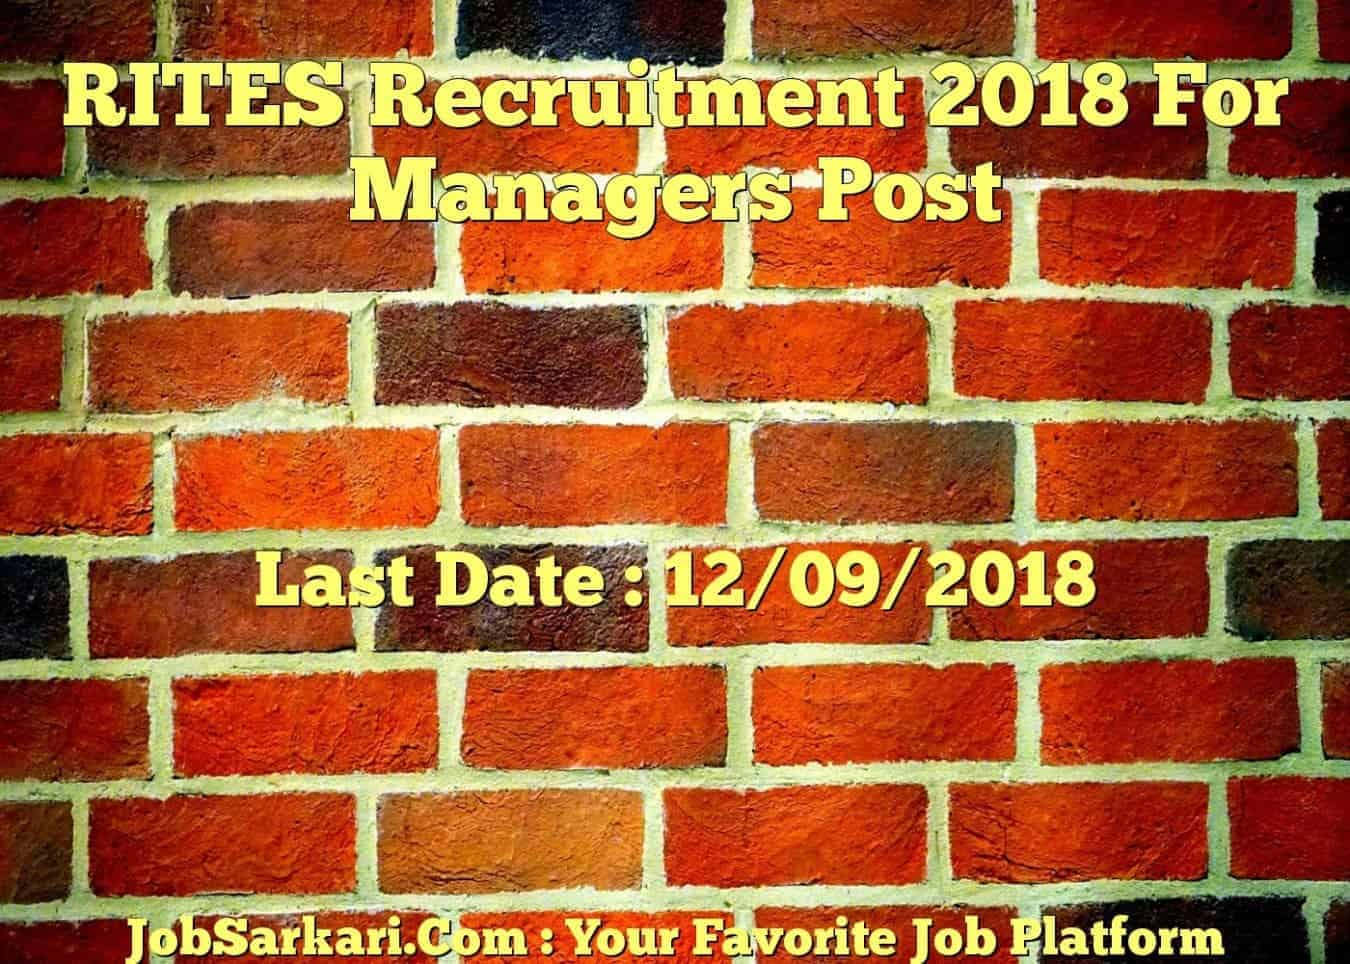 RITES Recruitment 2018 For Managers Post